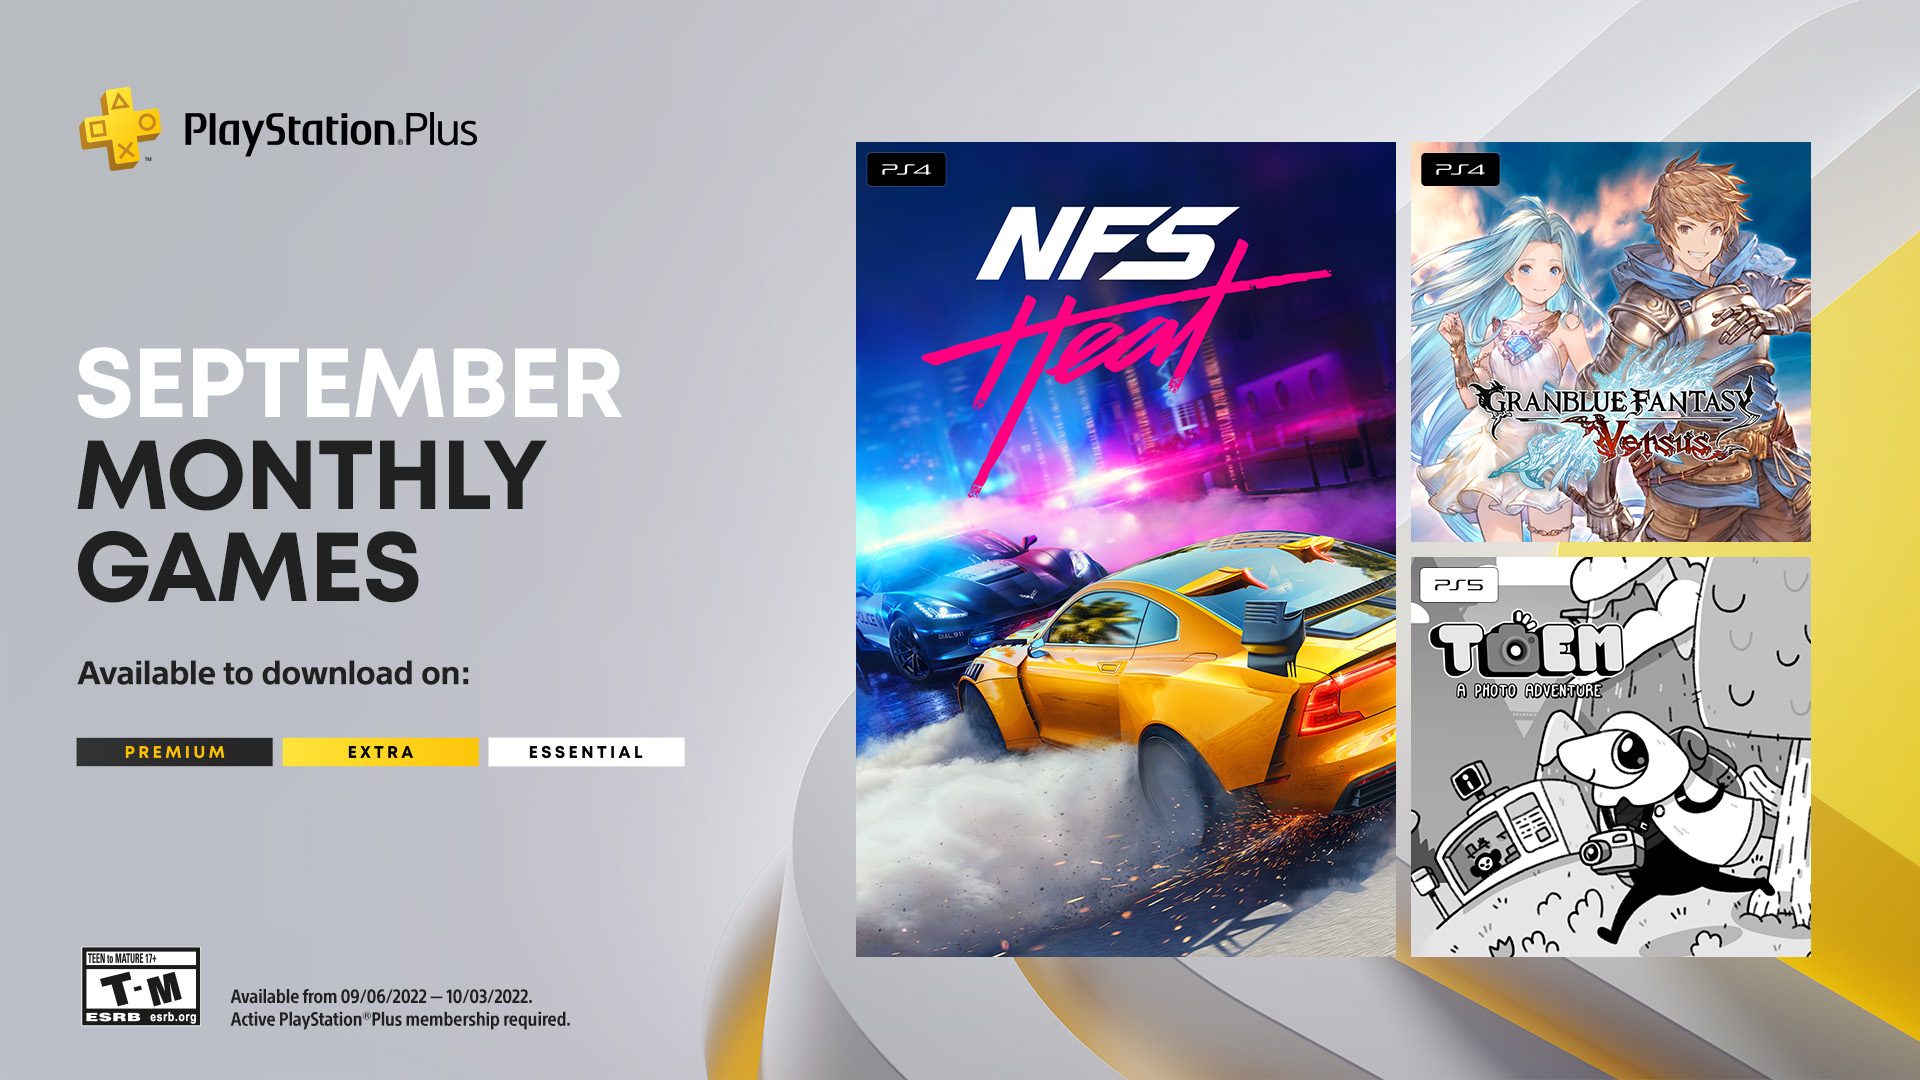 PlayStation Plus Monthly Games and Game Catalog lineup for September revealed 